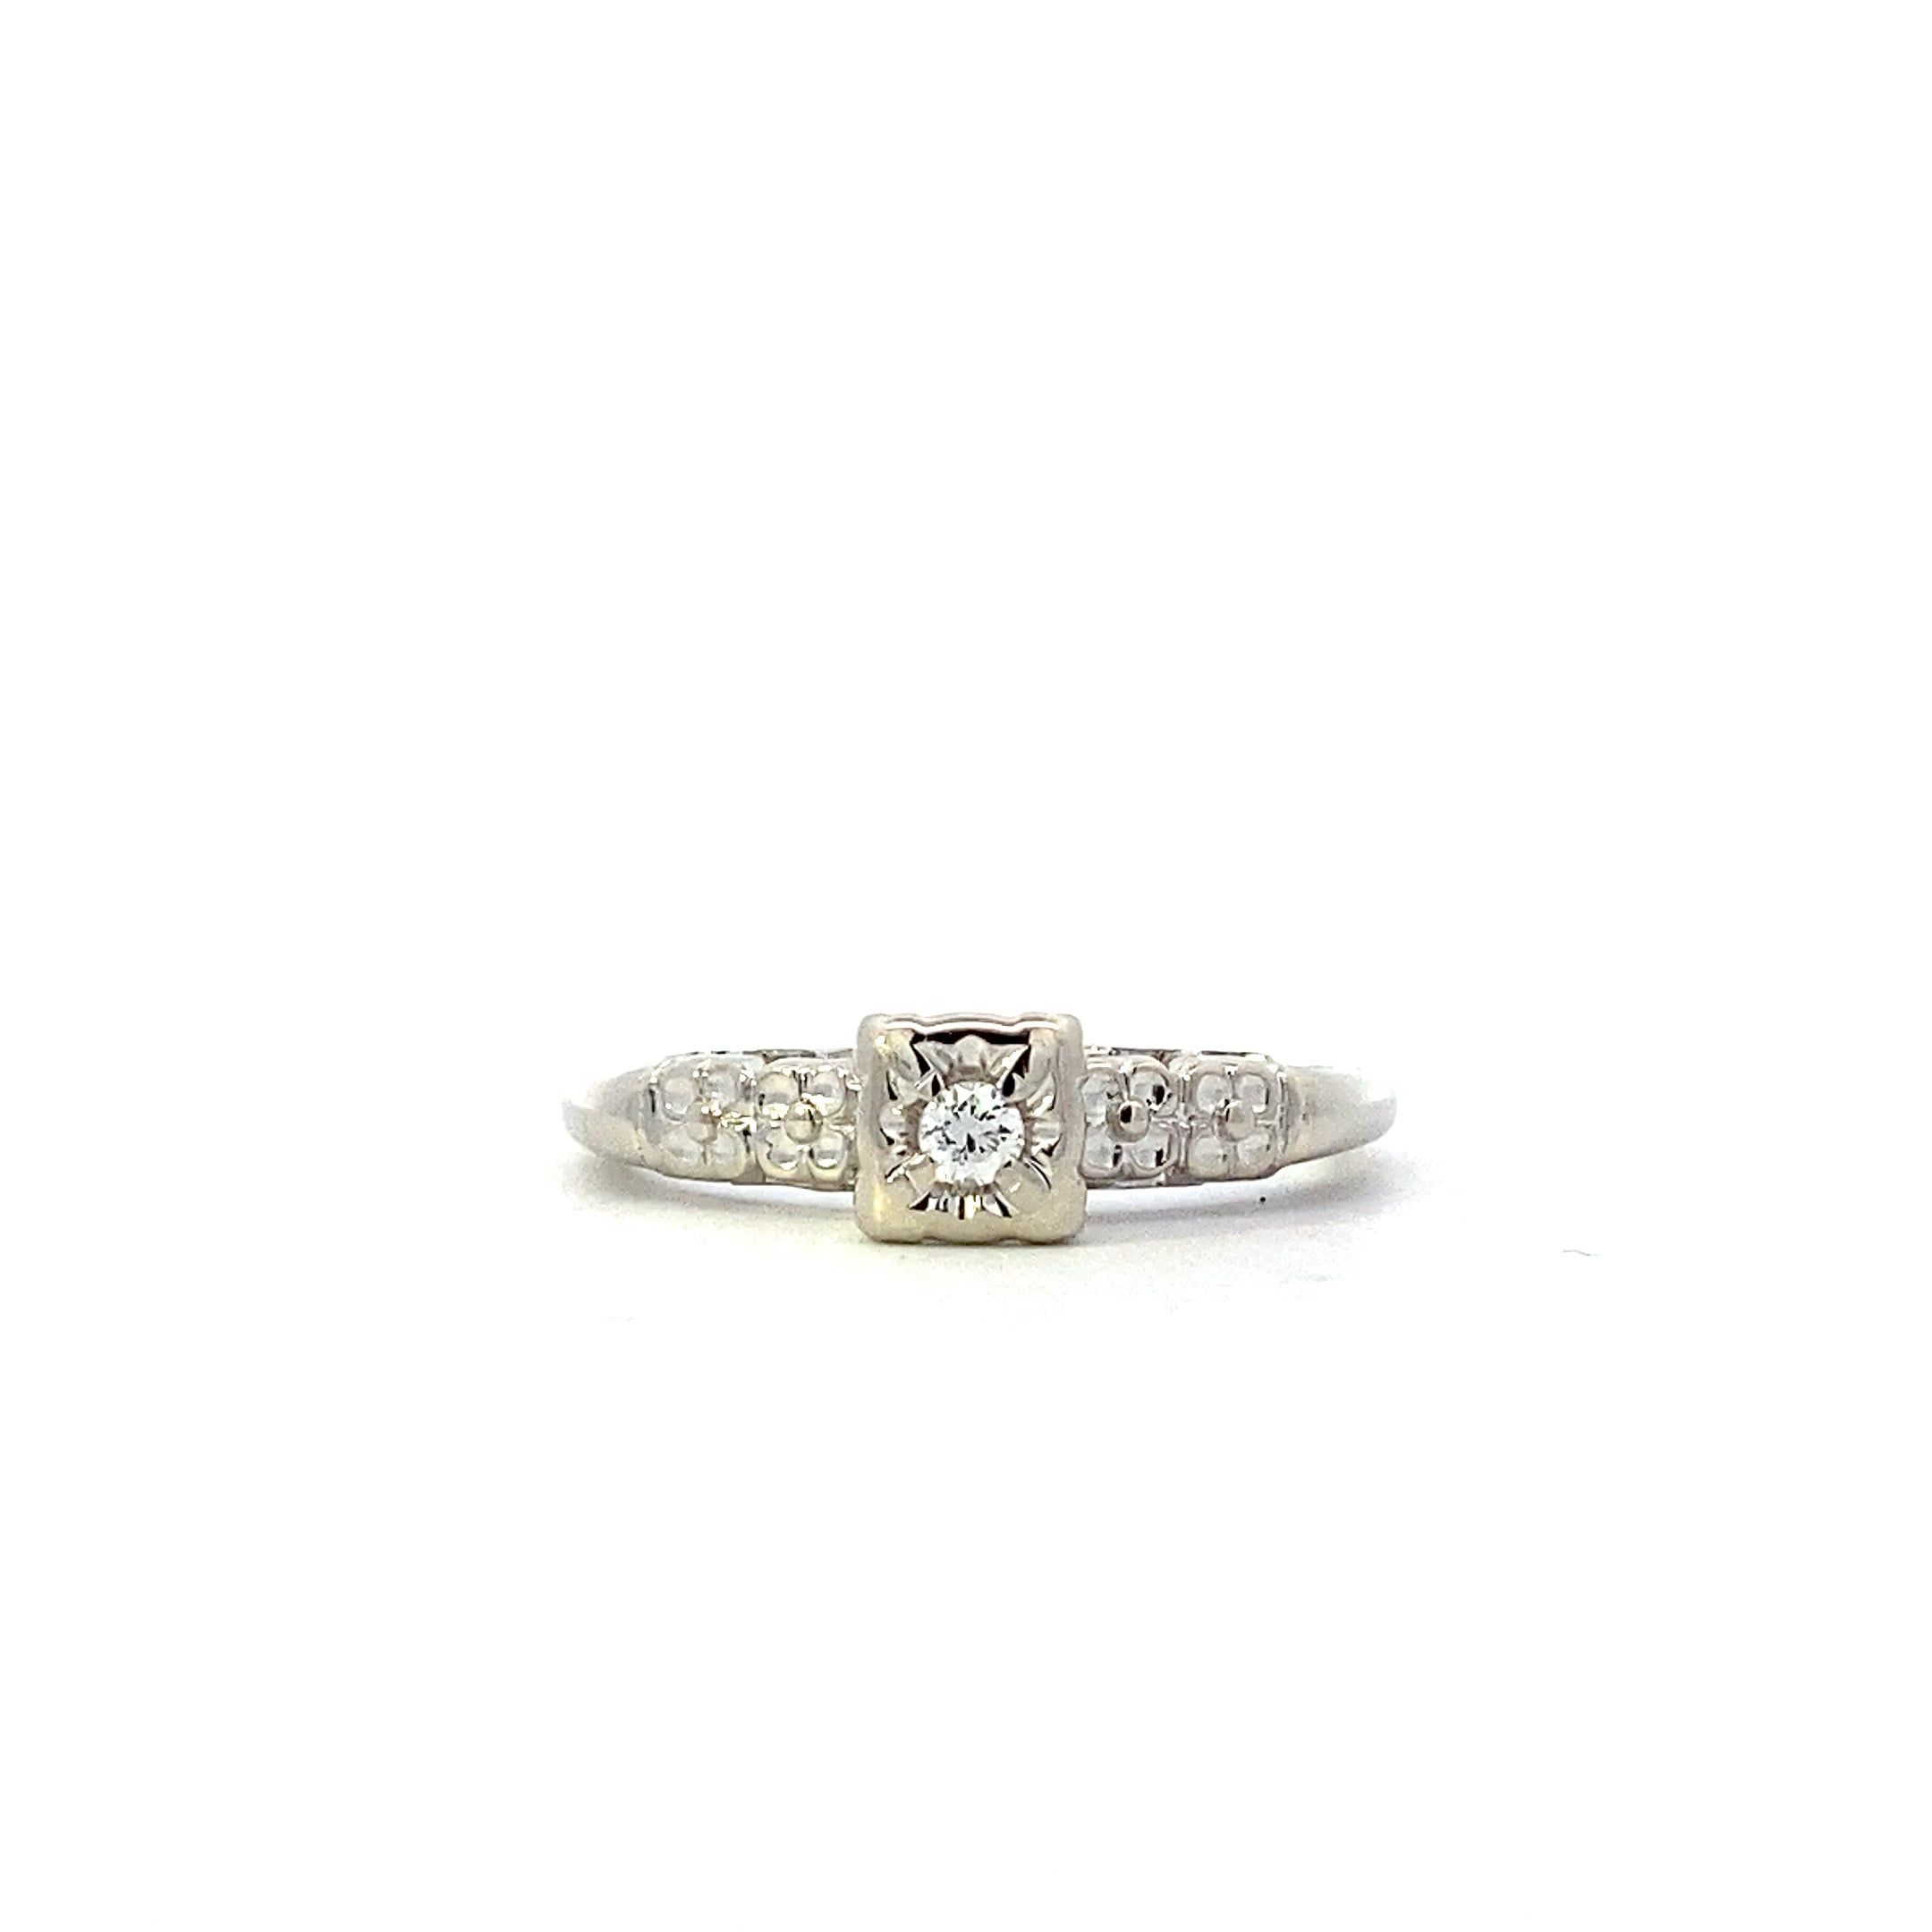 14K White Gold Diamond Solitaire Ring - 0.05ct